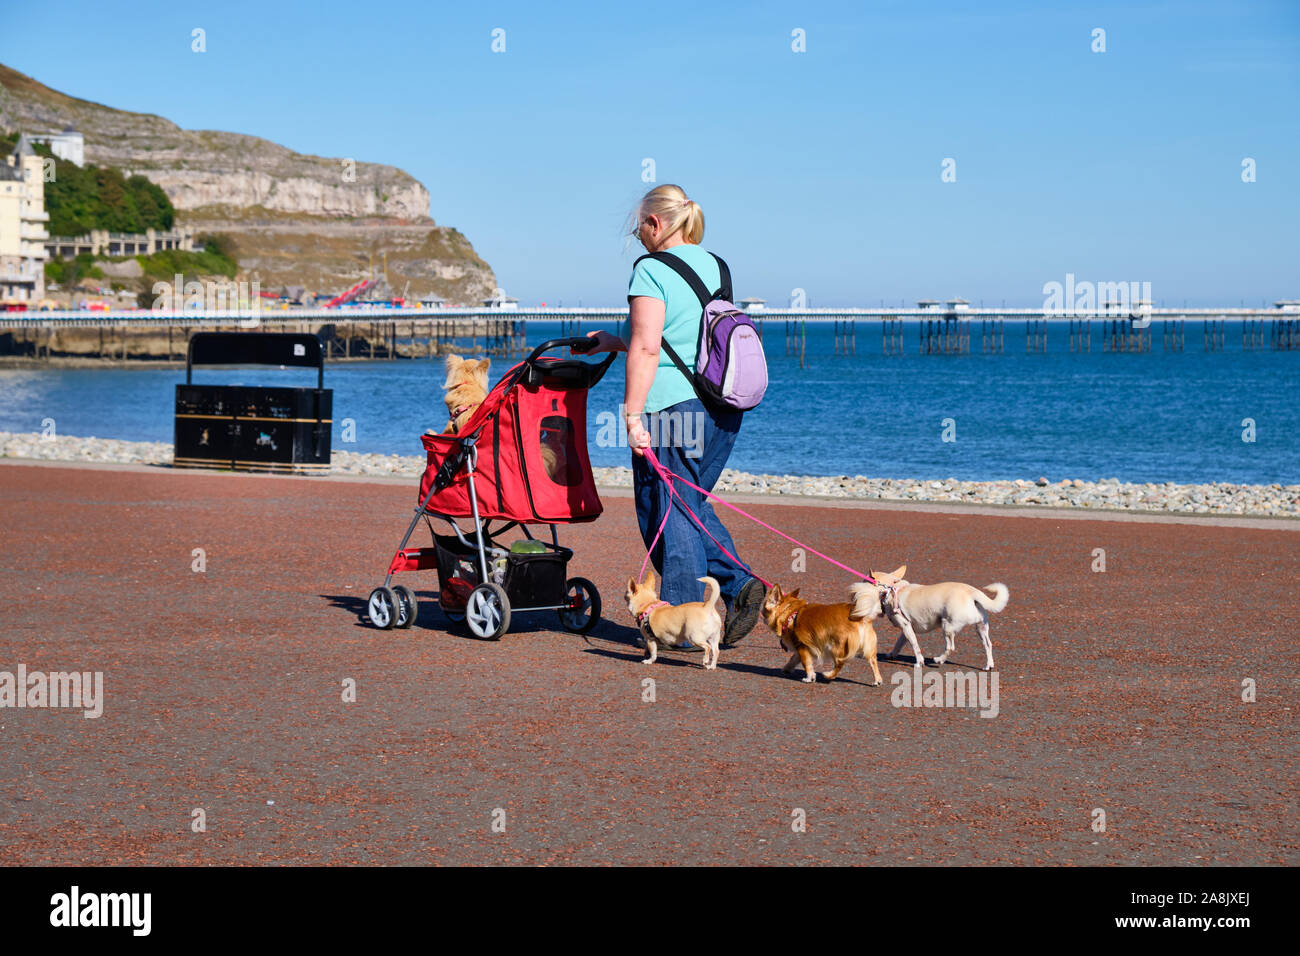 Woman out for a walk on a sunny autumn day on the pier of Llandudno Wales with three dogs on leash and one in a pram.  Llandudno, Wales, September 18, Stock Photo